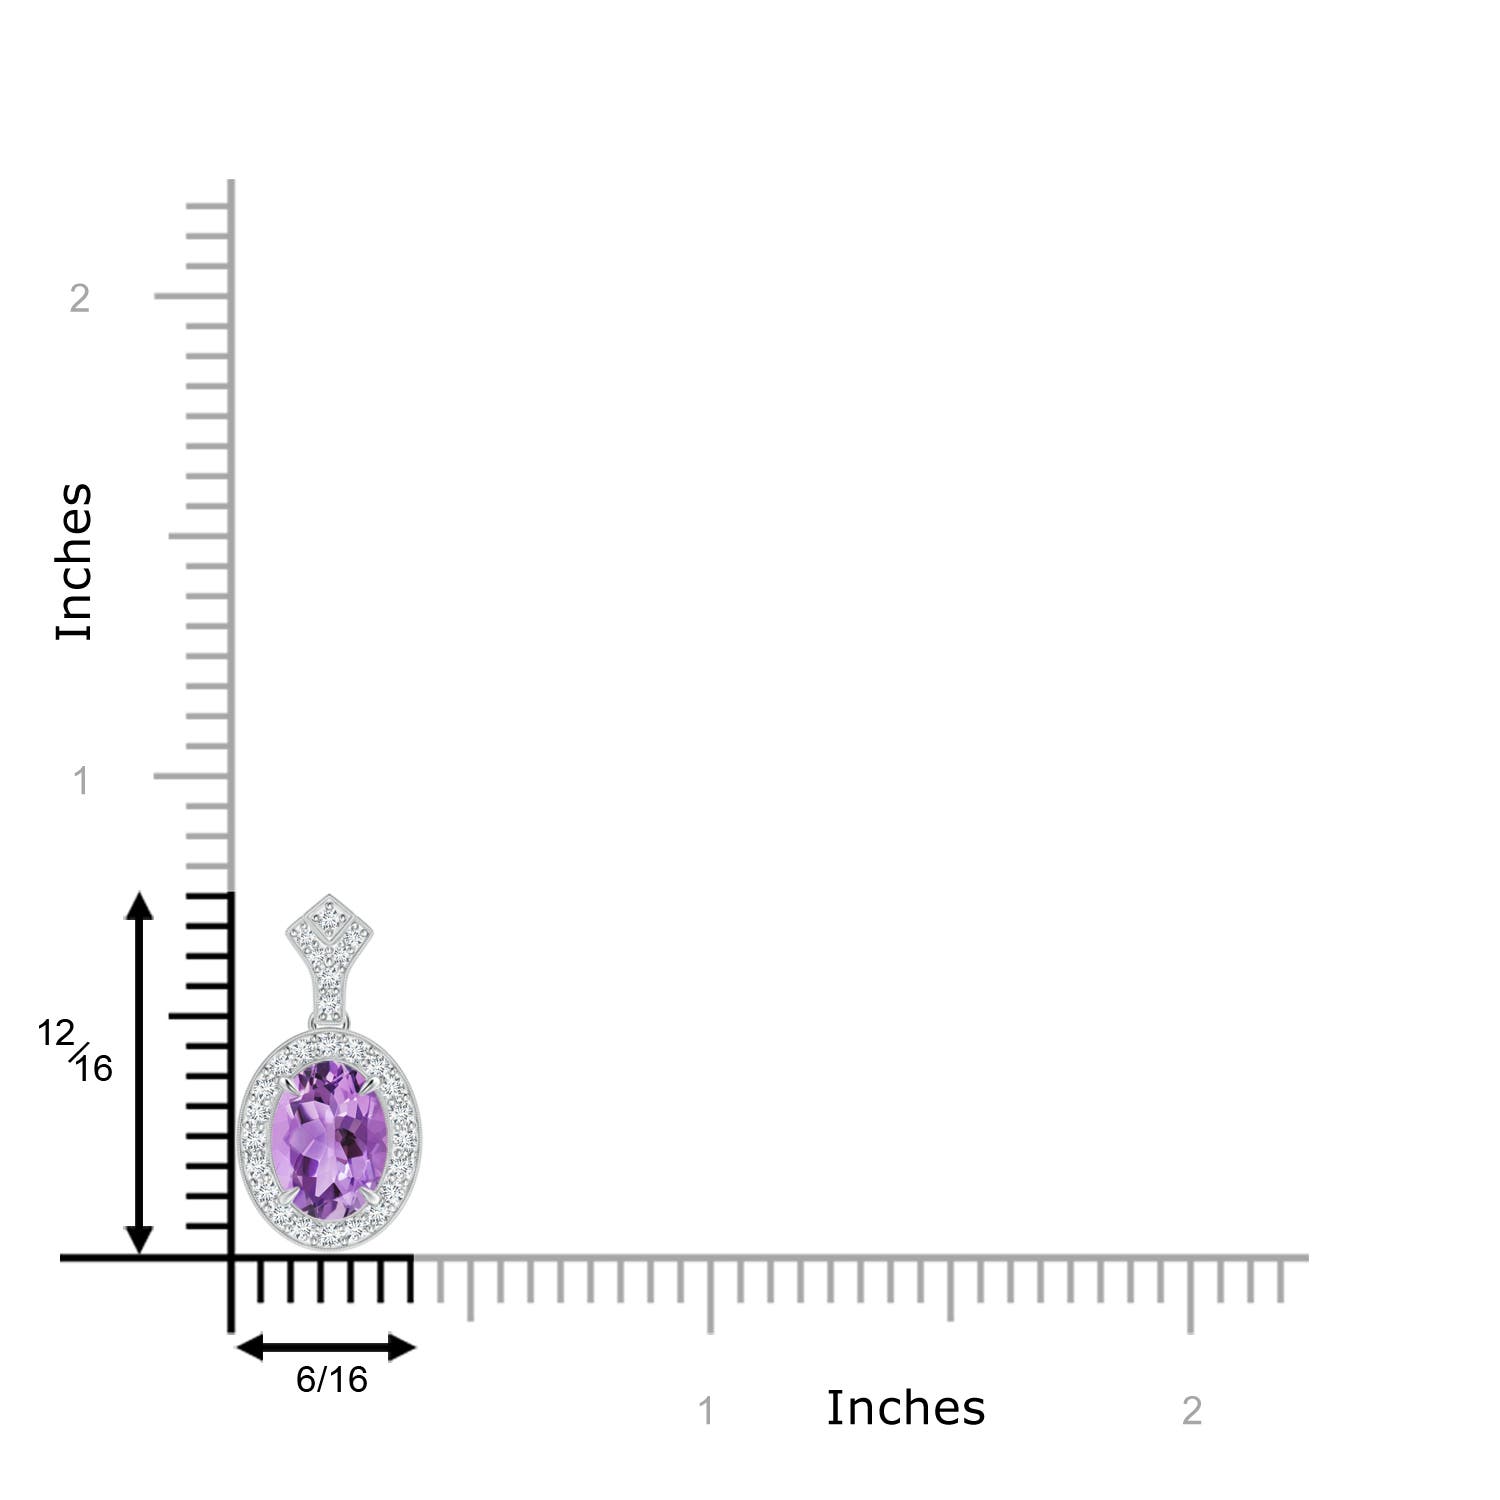 A - Amethyst / 1.79 CT / 14 KT White Gold